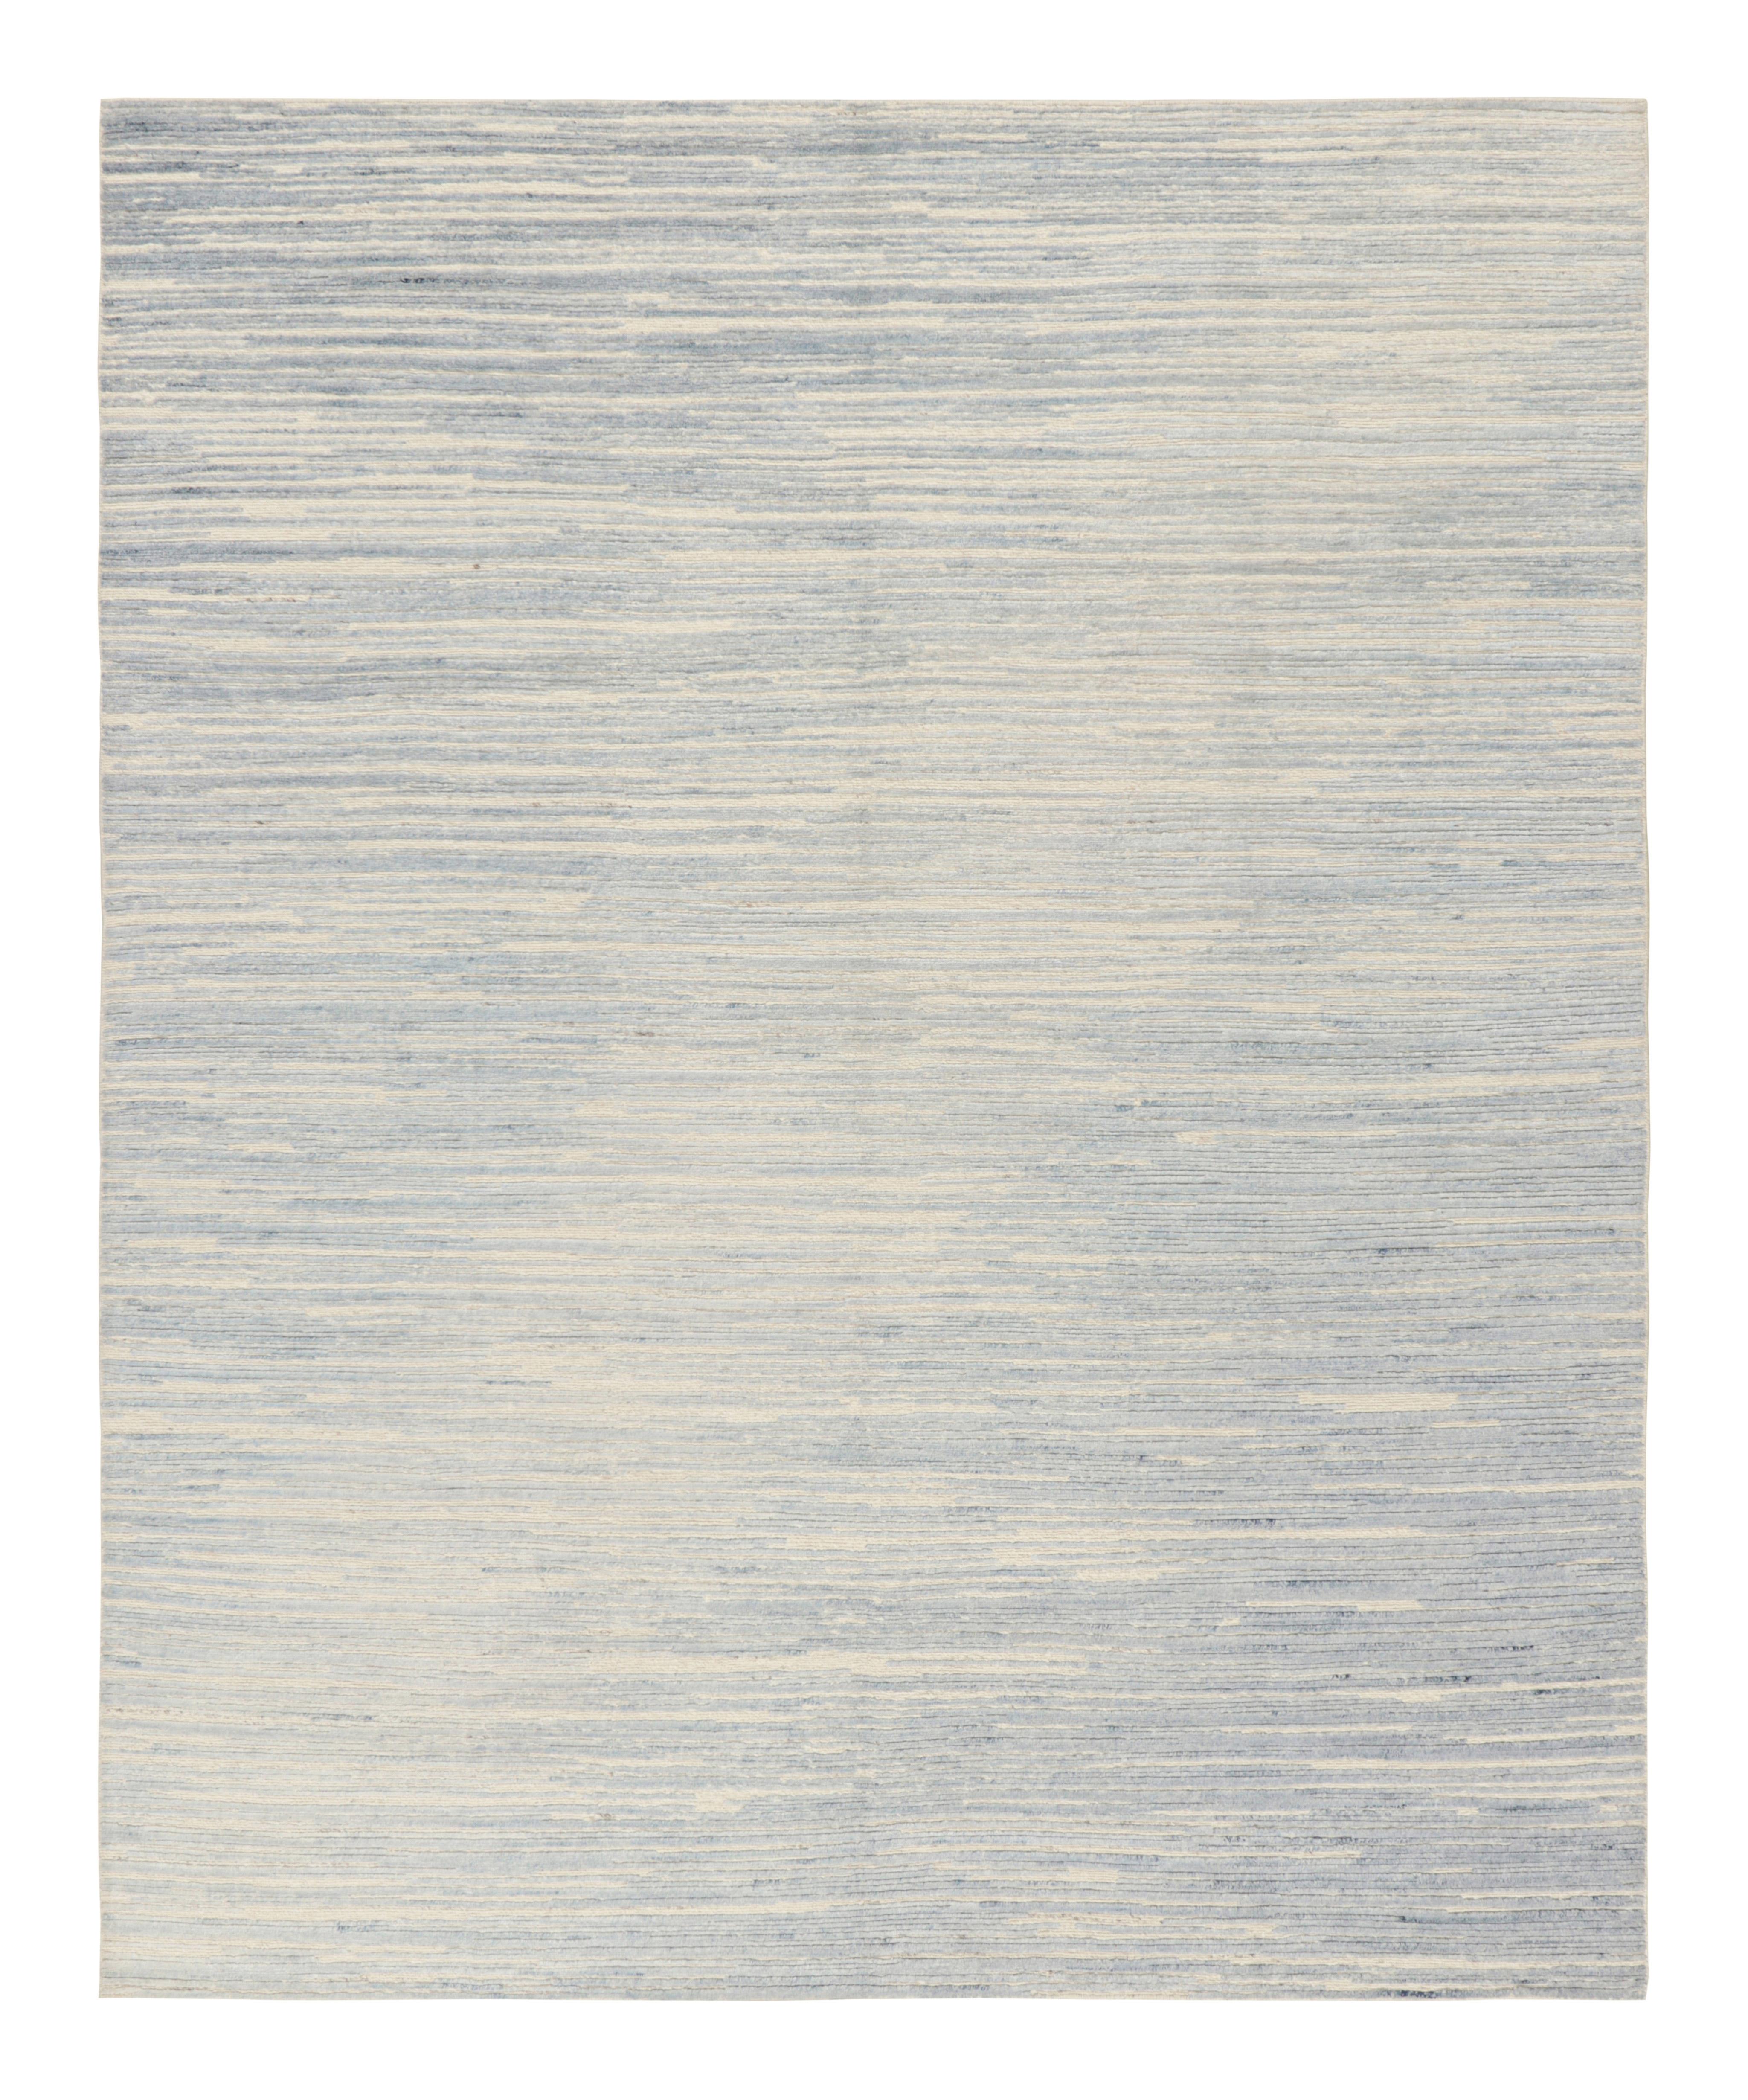 Rug & Kilim’s Contemporary Textural Rug in Blue and Beige Tones and Striae In New Condition For Sale In Long Island City, NY